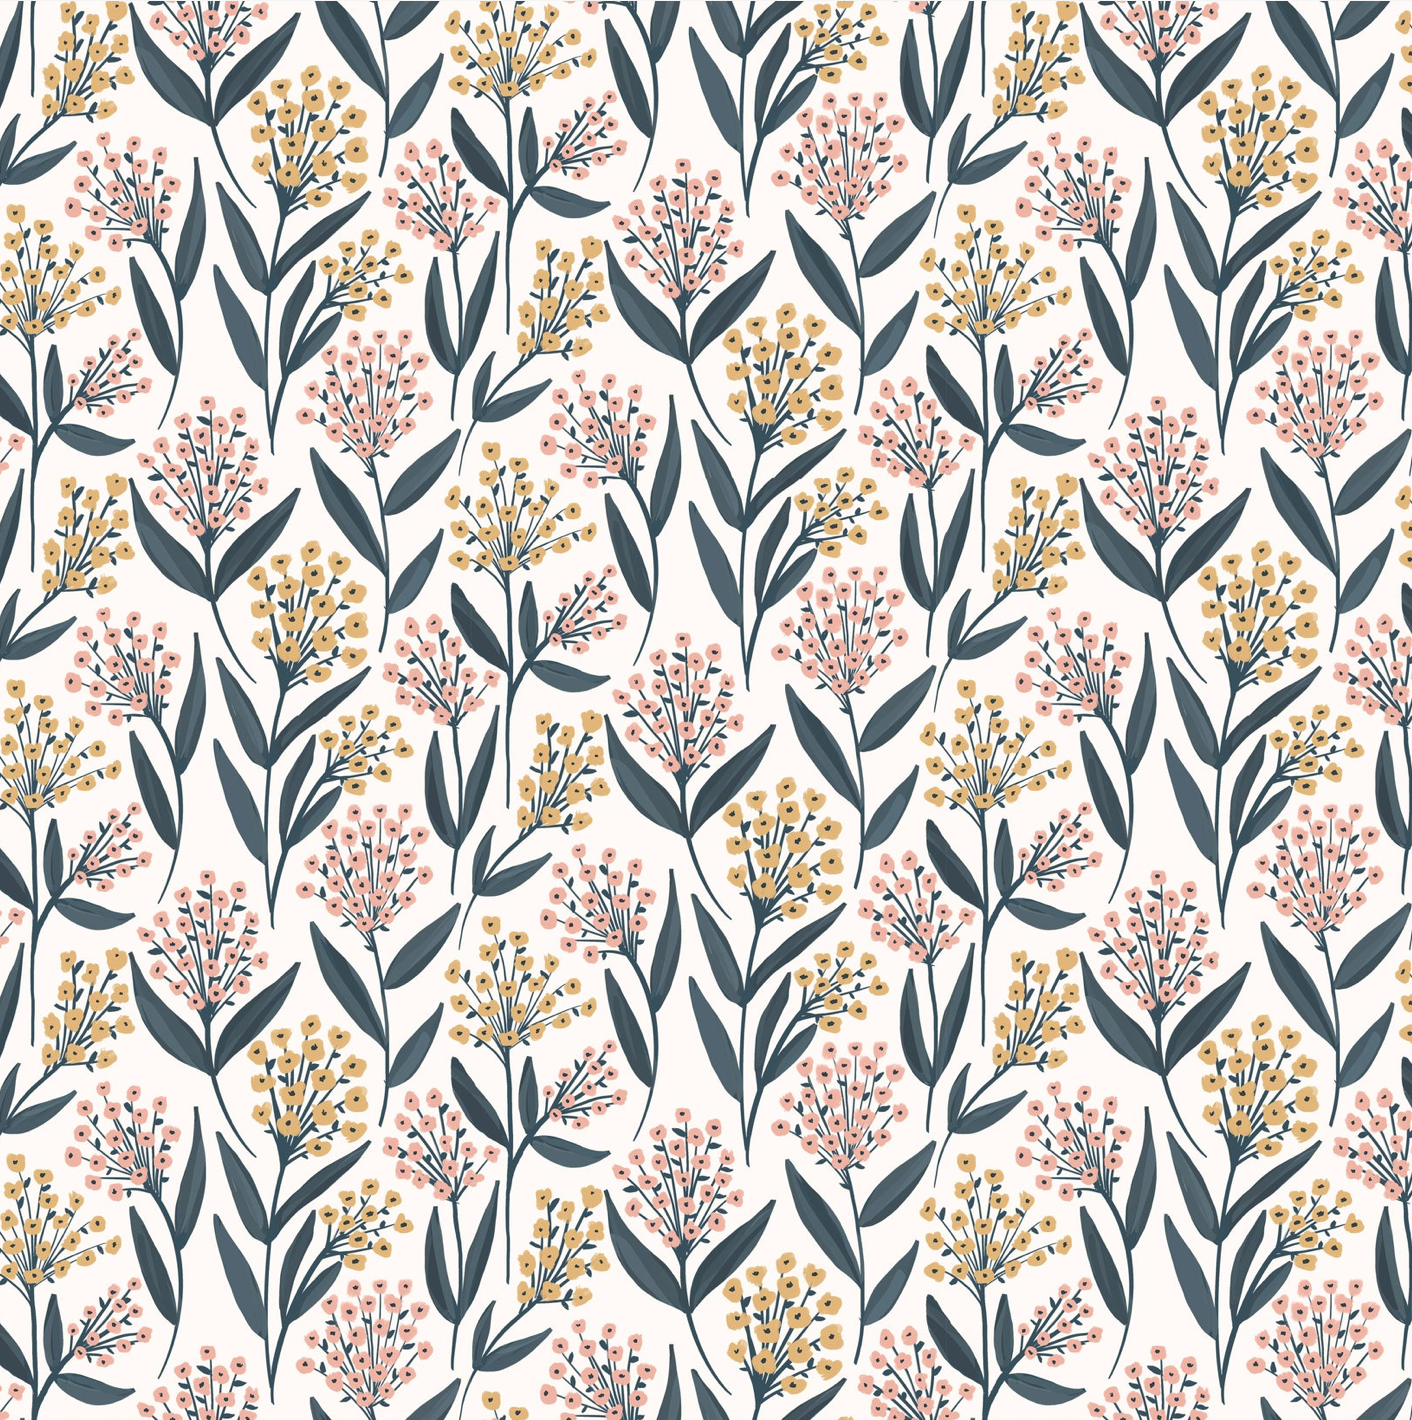 Painted Blossoms Barely Buds White PB24670, sold by the 1/2 yard, *PREORDER